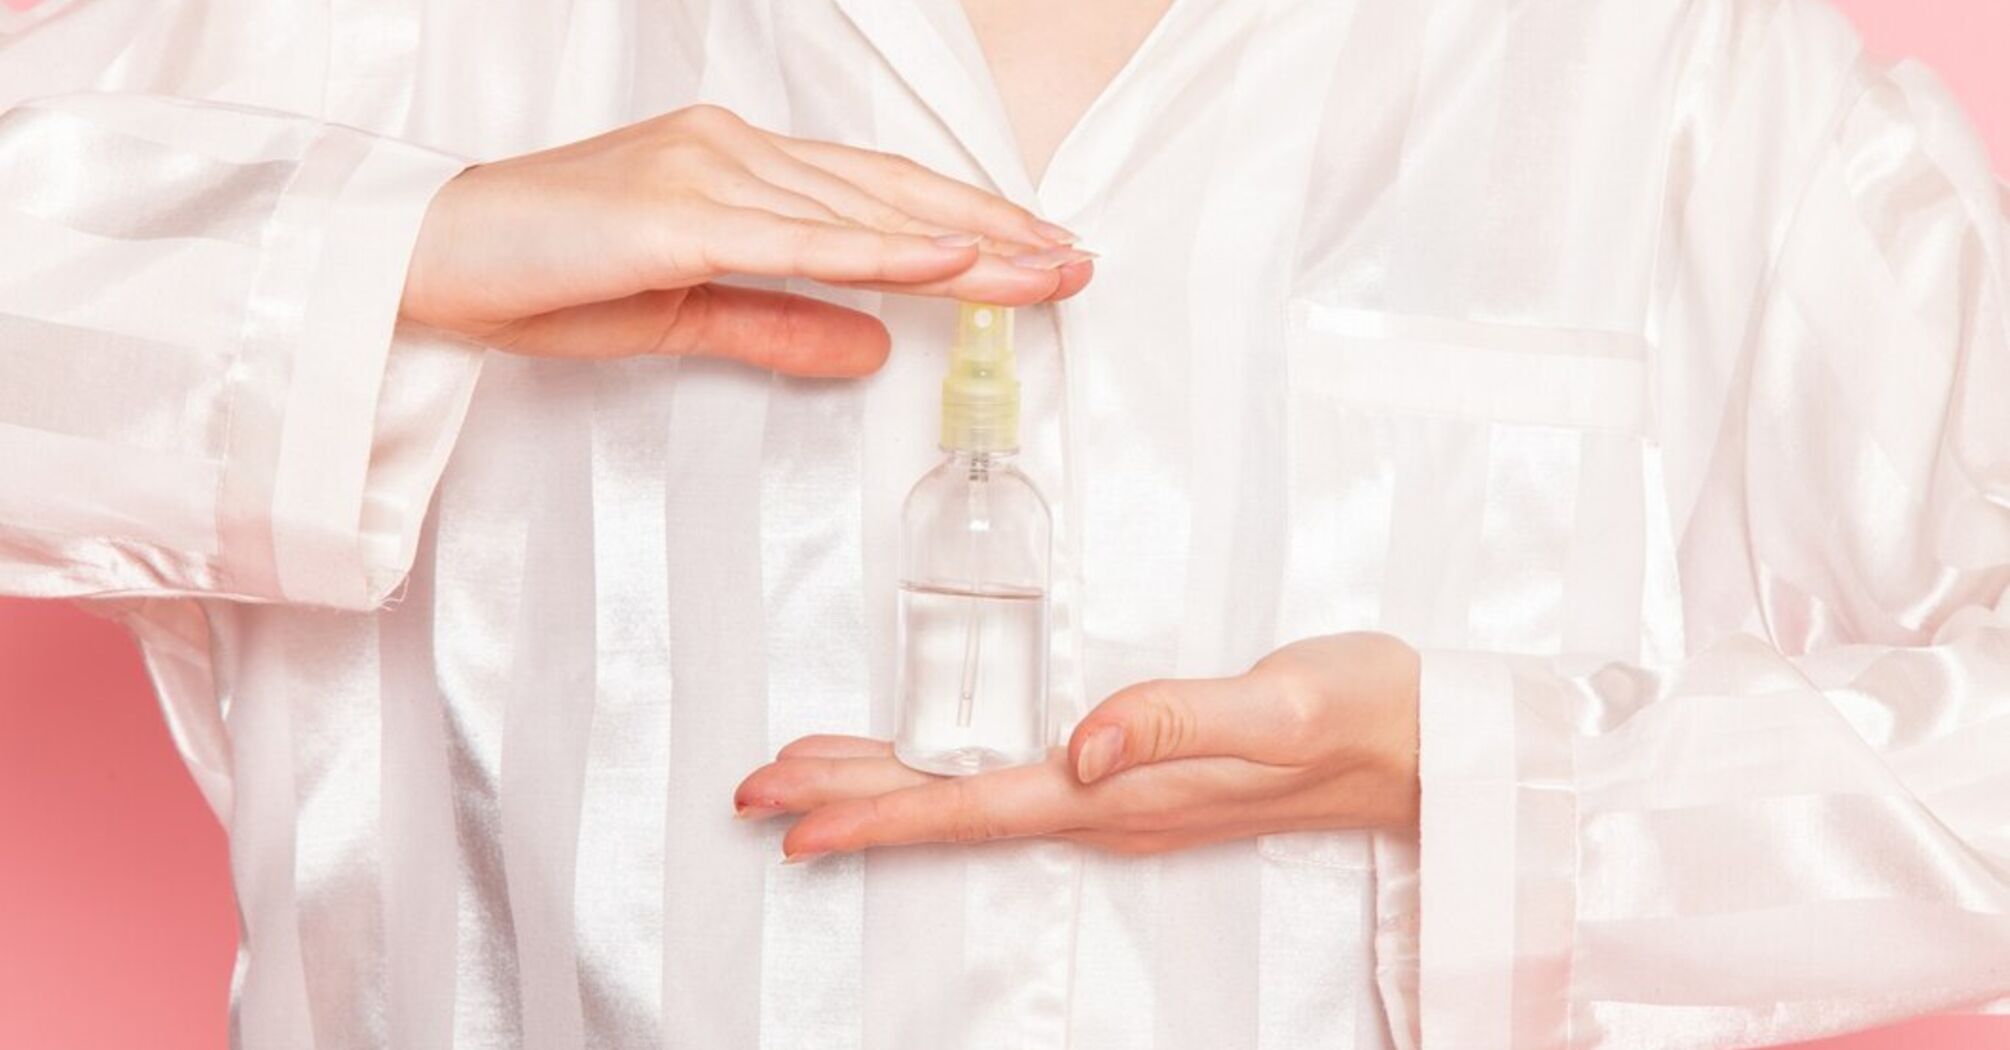 How to remove perfume stains from clothes: simple but effective ways